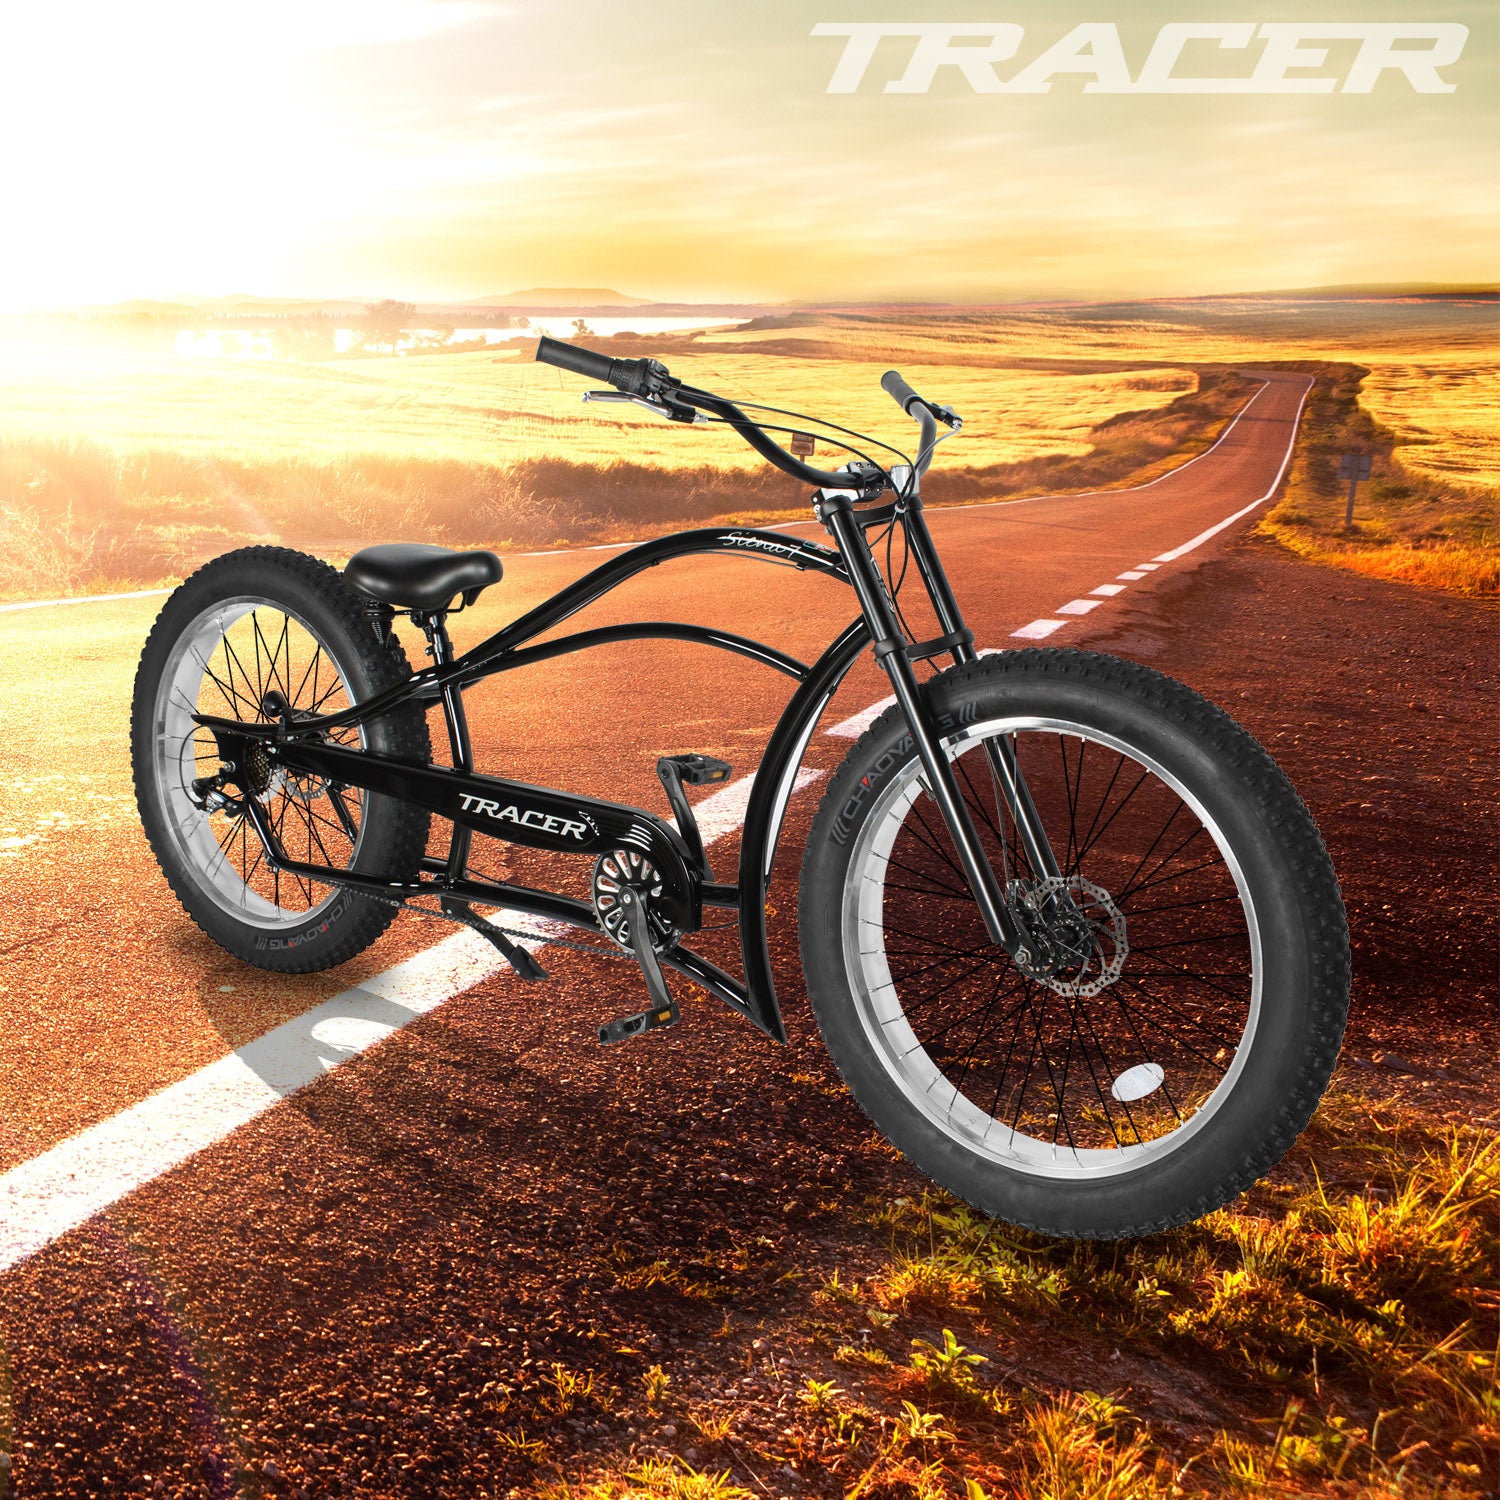 Tracer Siena 26'' Chopper Stretch Cruiser Fat Tire Bike Available 1 Speed/7 Speed